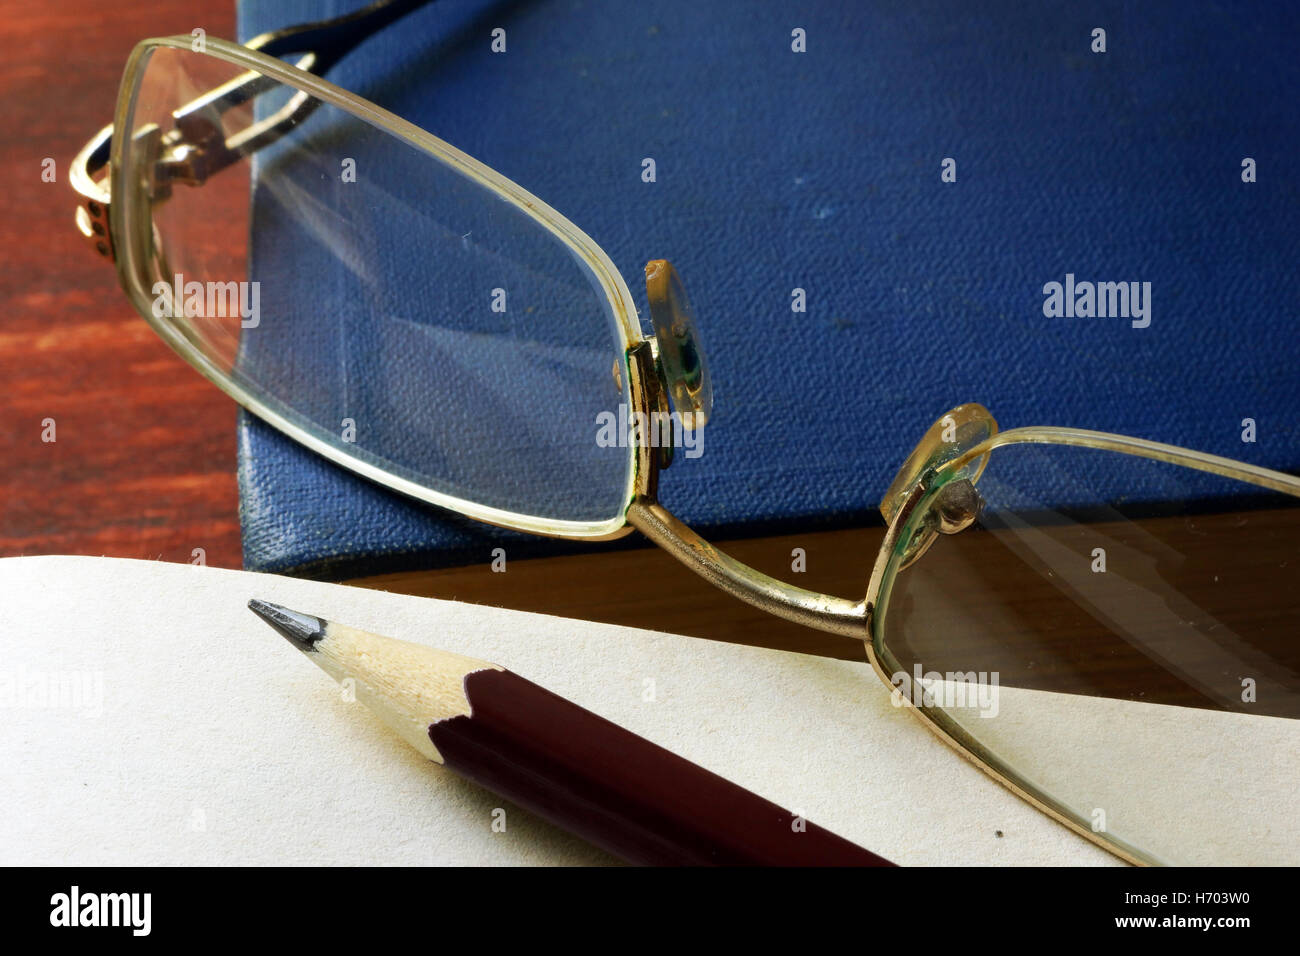 Pencil with notepad and books on wooden table. Stock Photo